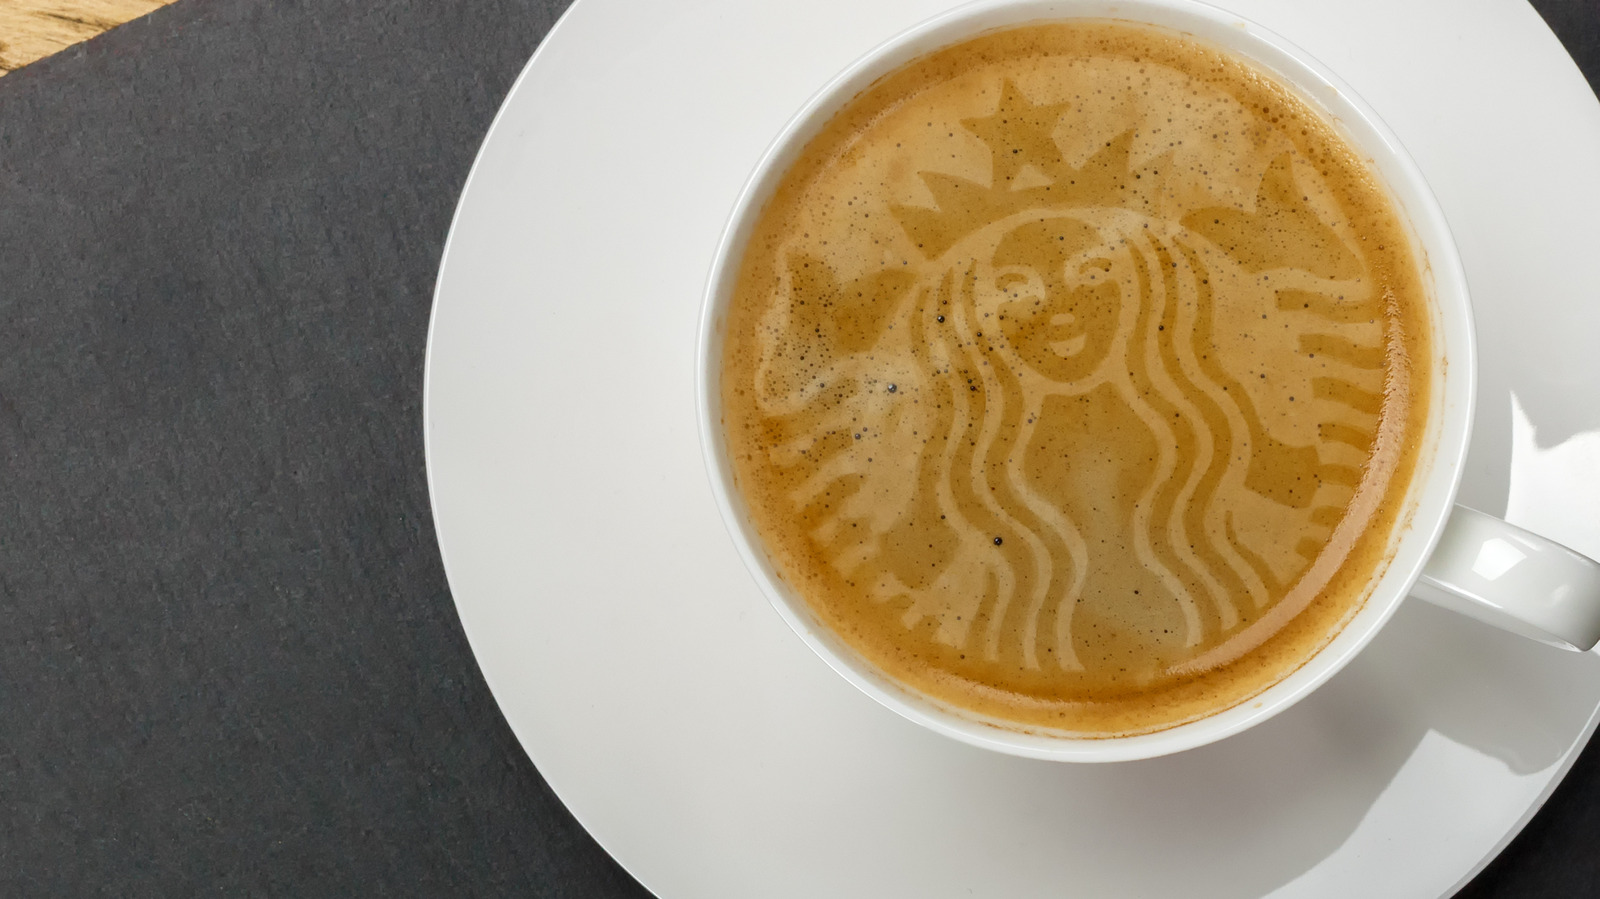 https://www.mashed.com/img/gallery/the-absolute-best-52-starbucks-drinks-ranked/l-intro-1641950562.jpg